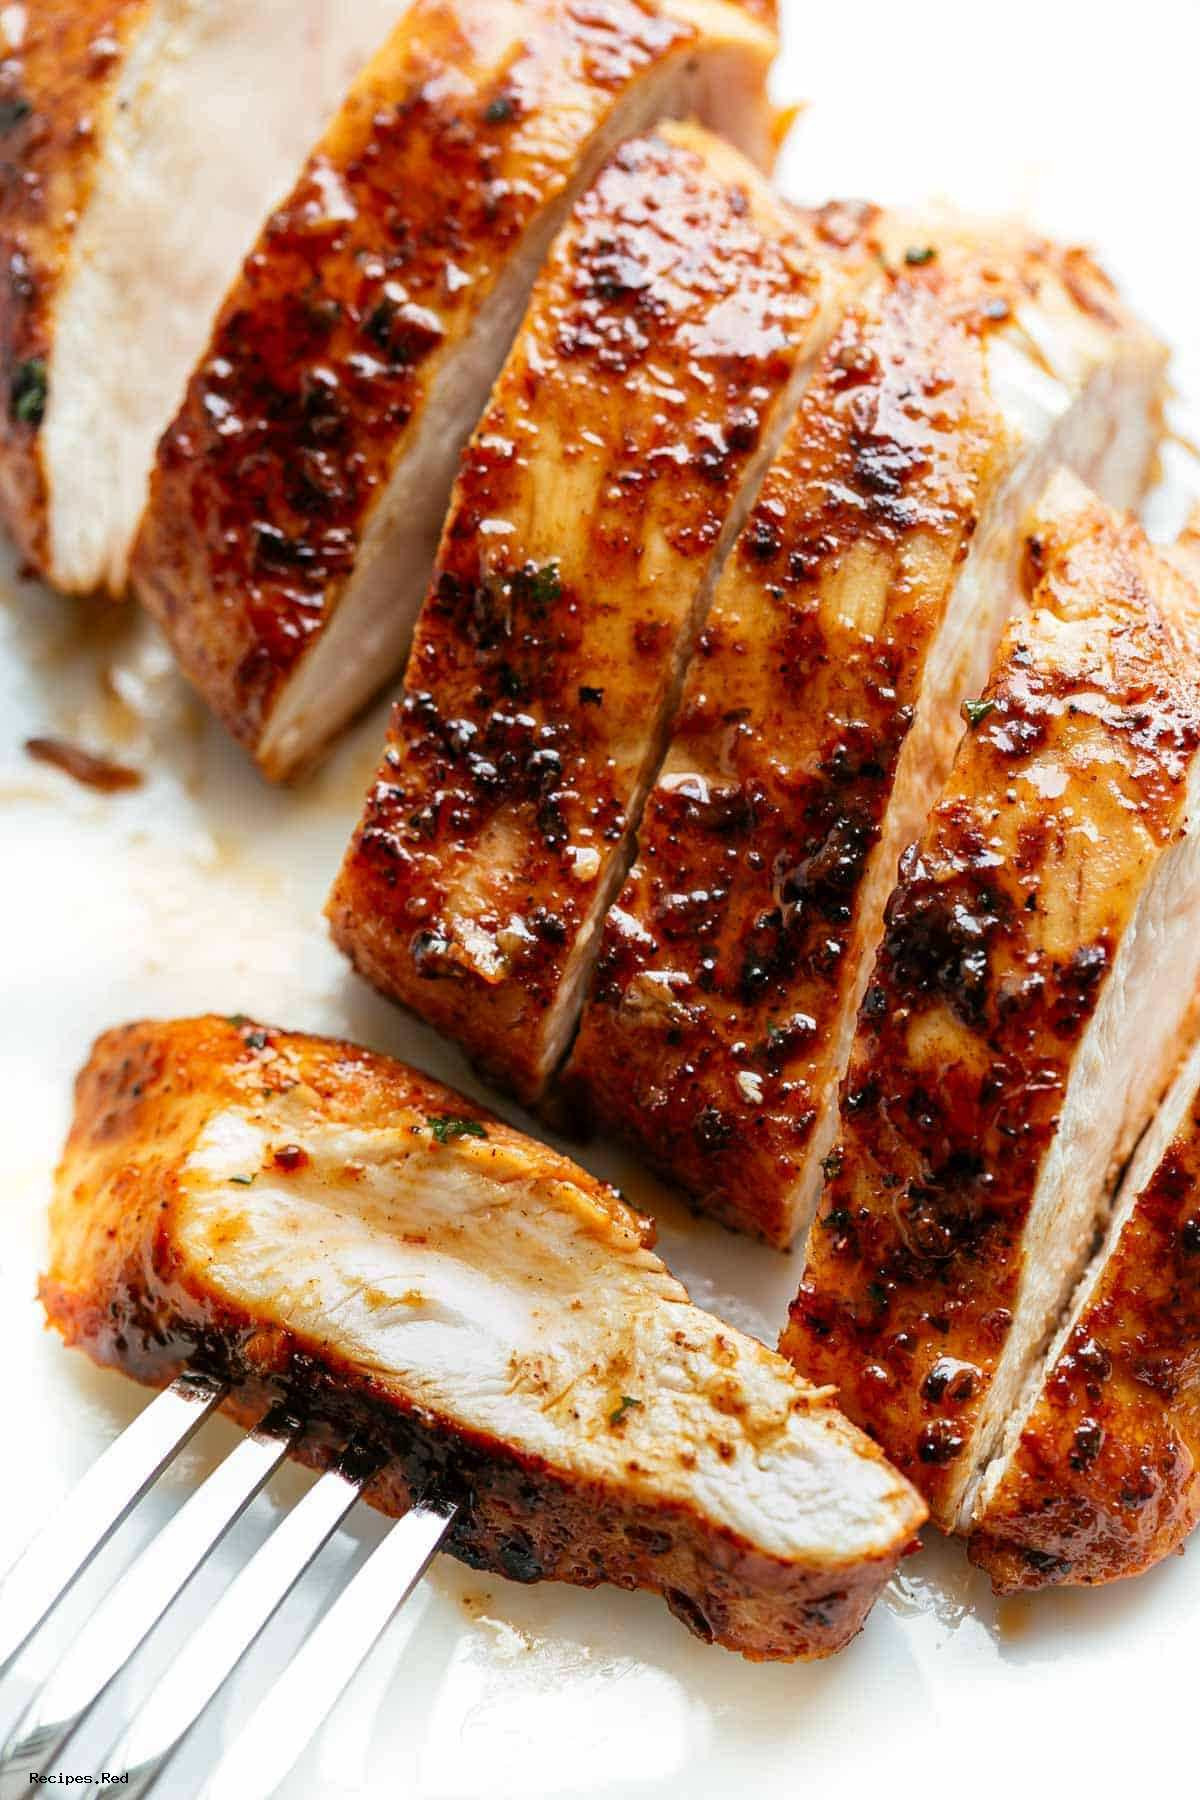 Easy Baking Large Chicken Breasts to Make at Home